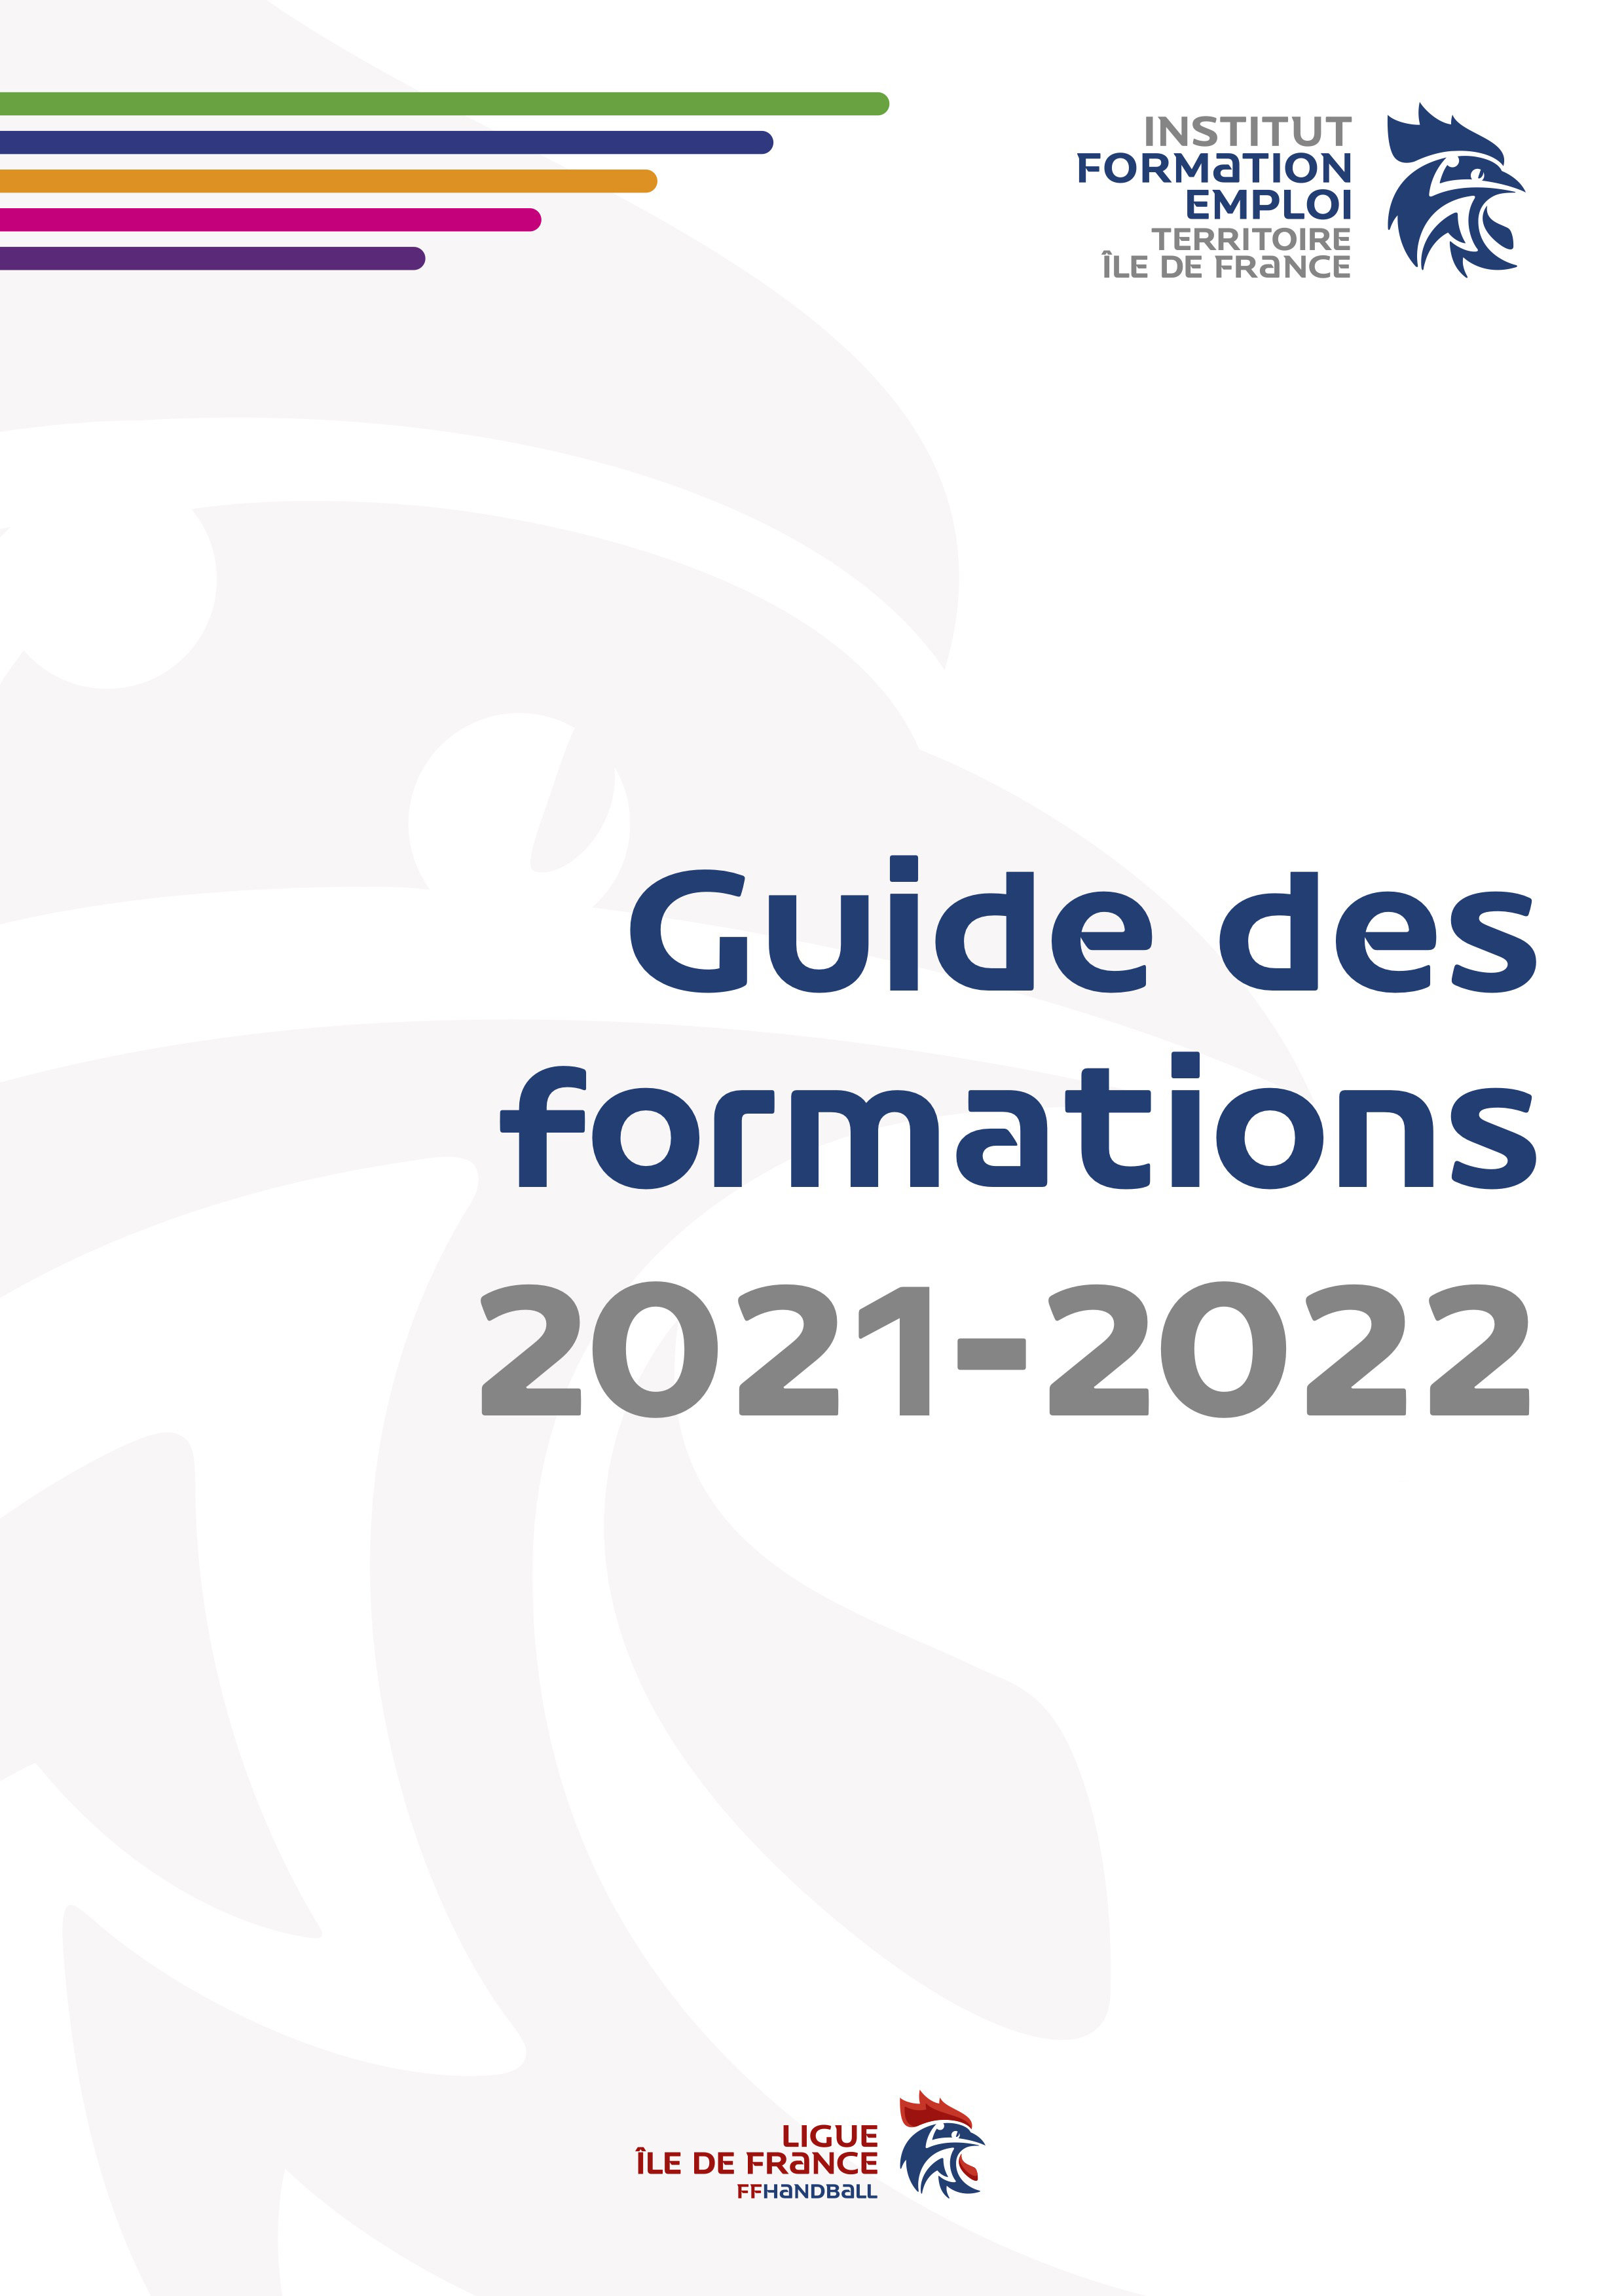 ITFE IDF guide formations 2021